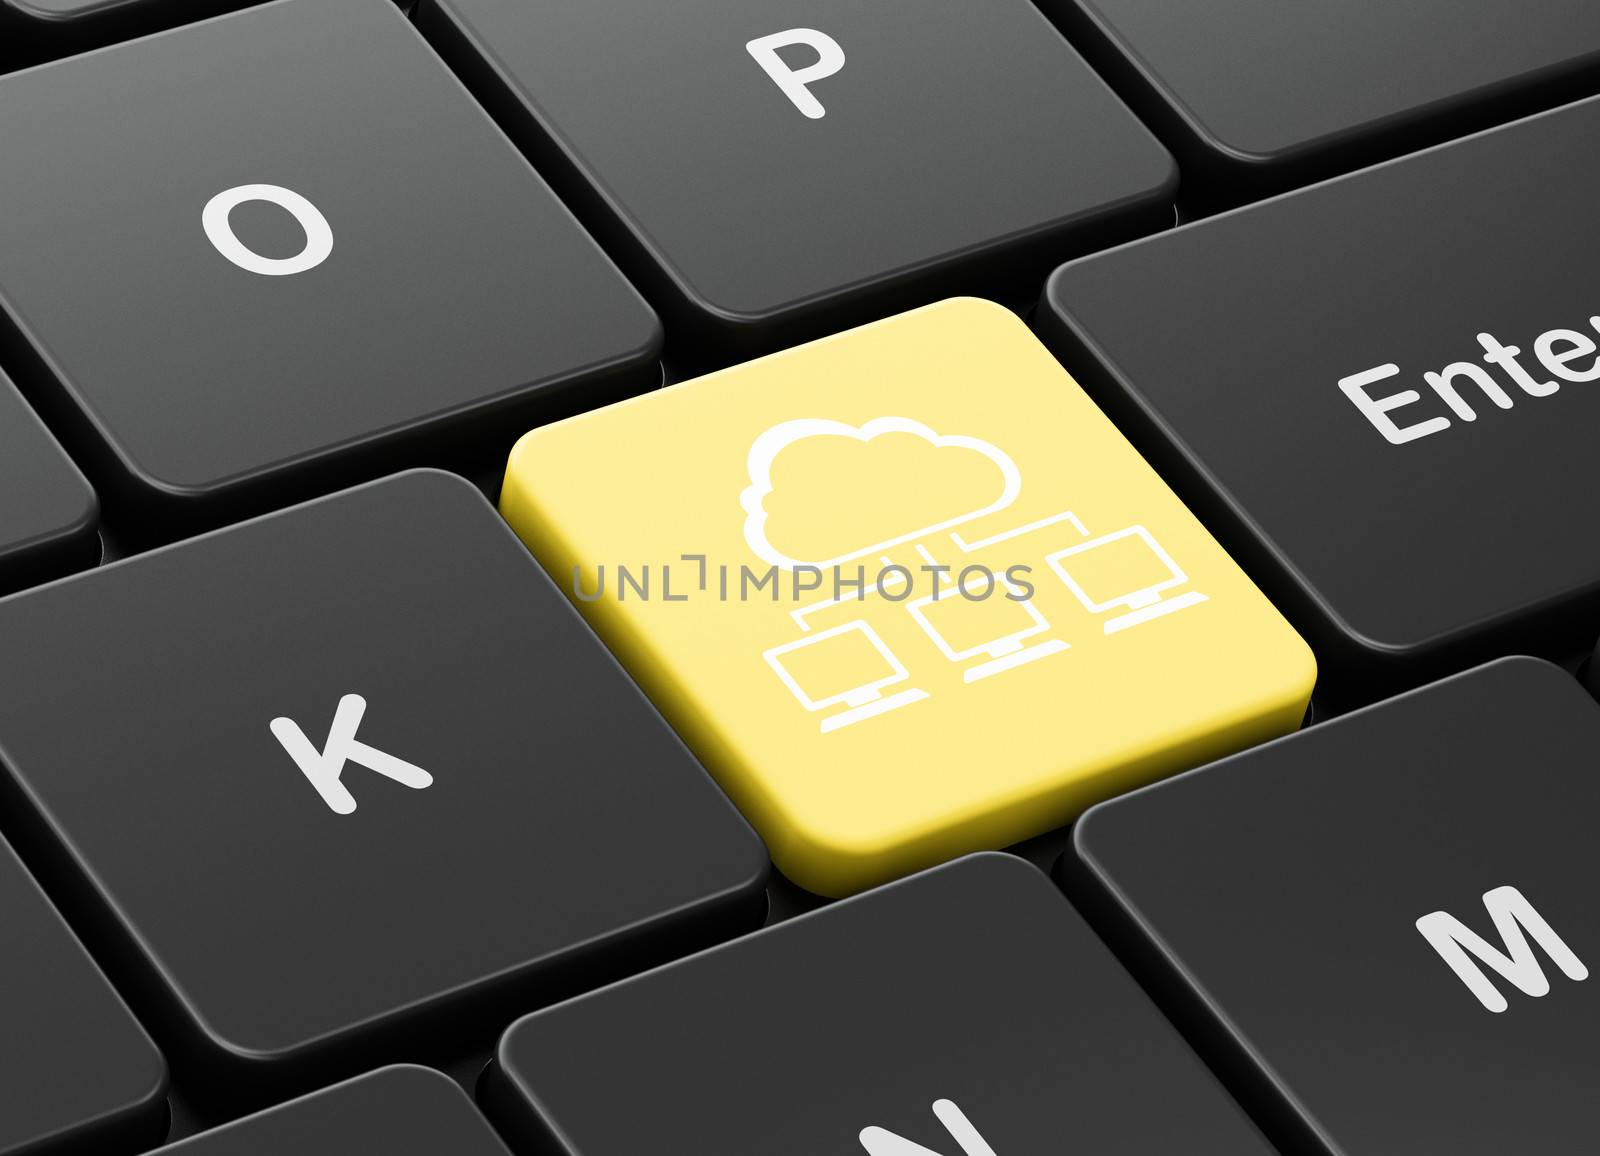 Cloud networking concept: computer keyboard with Cloud Network icon on enter button background, 3d render